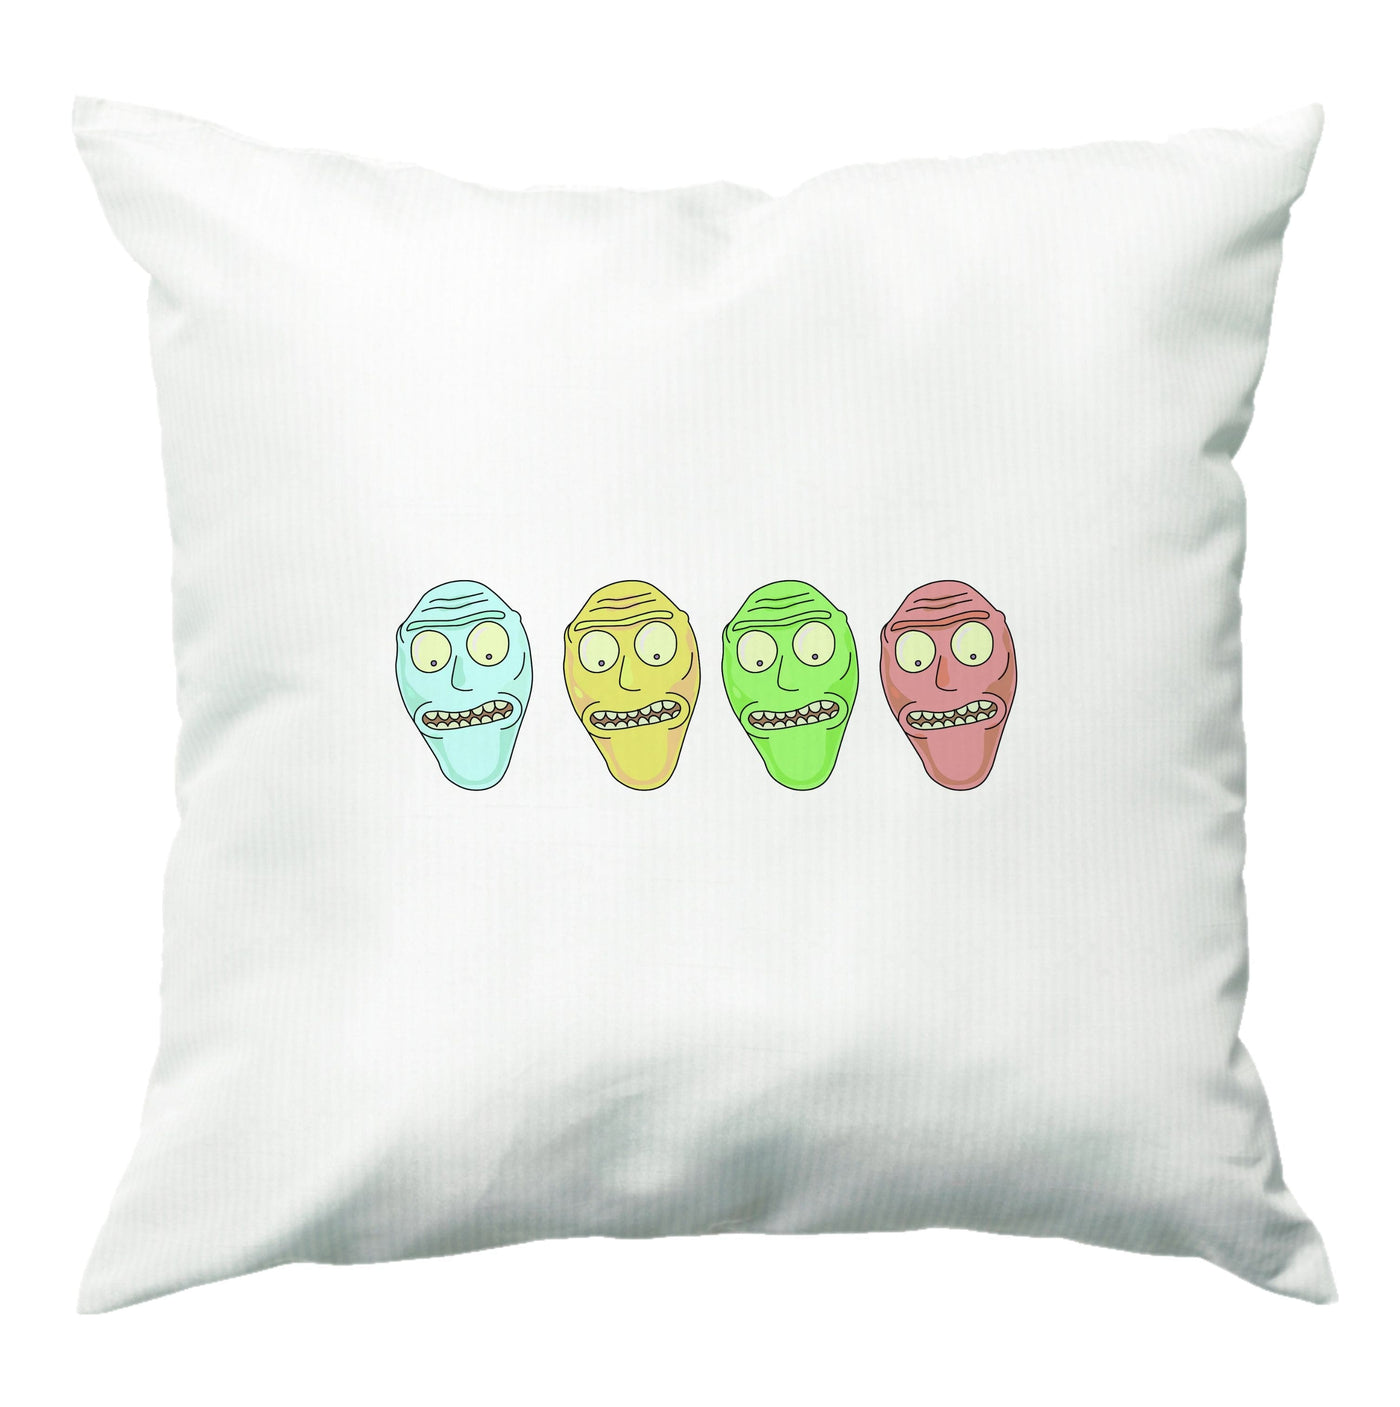 Get Schwifty - Rick And Morty Cushion